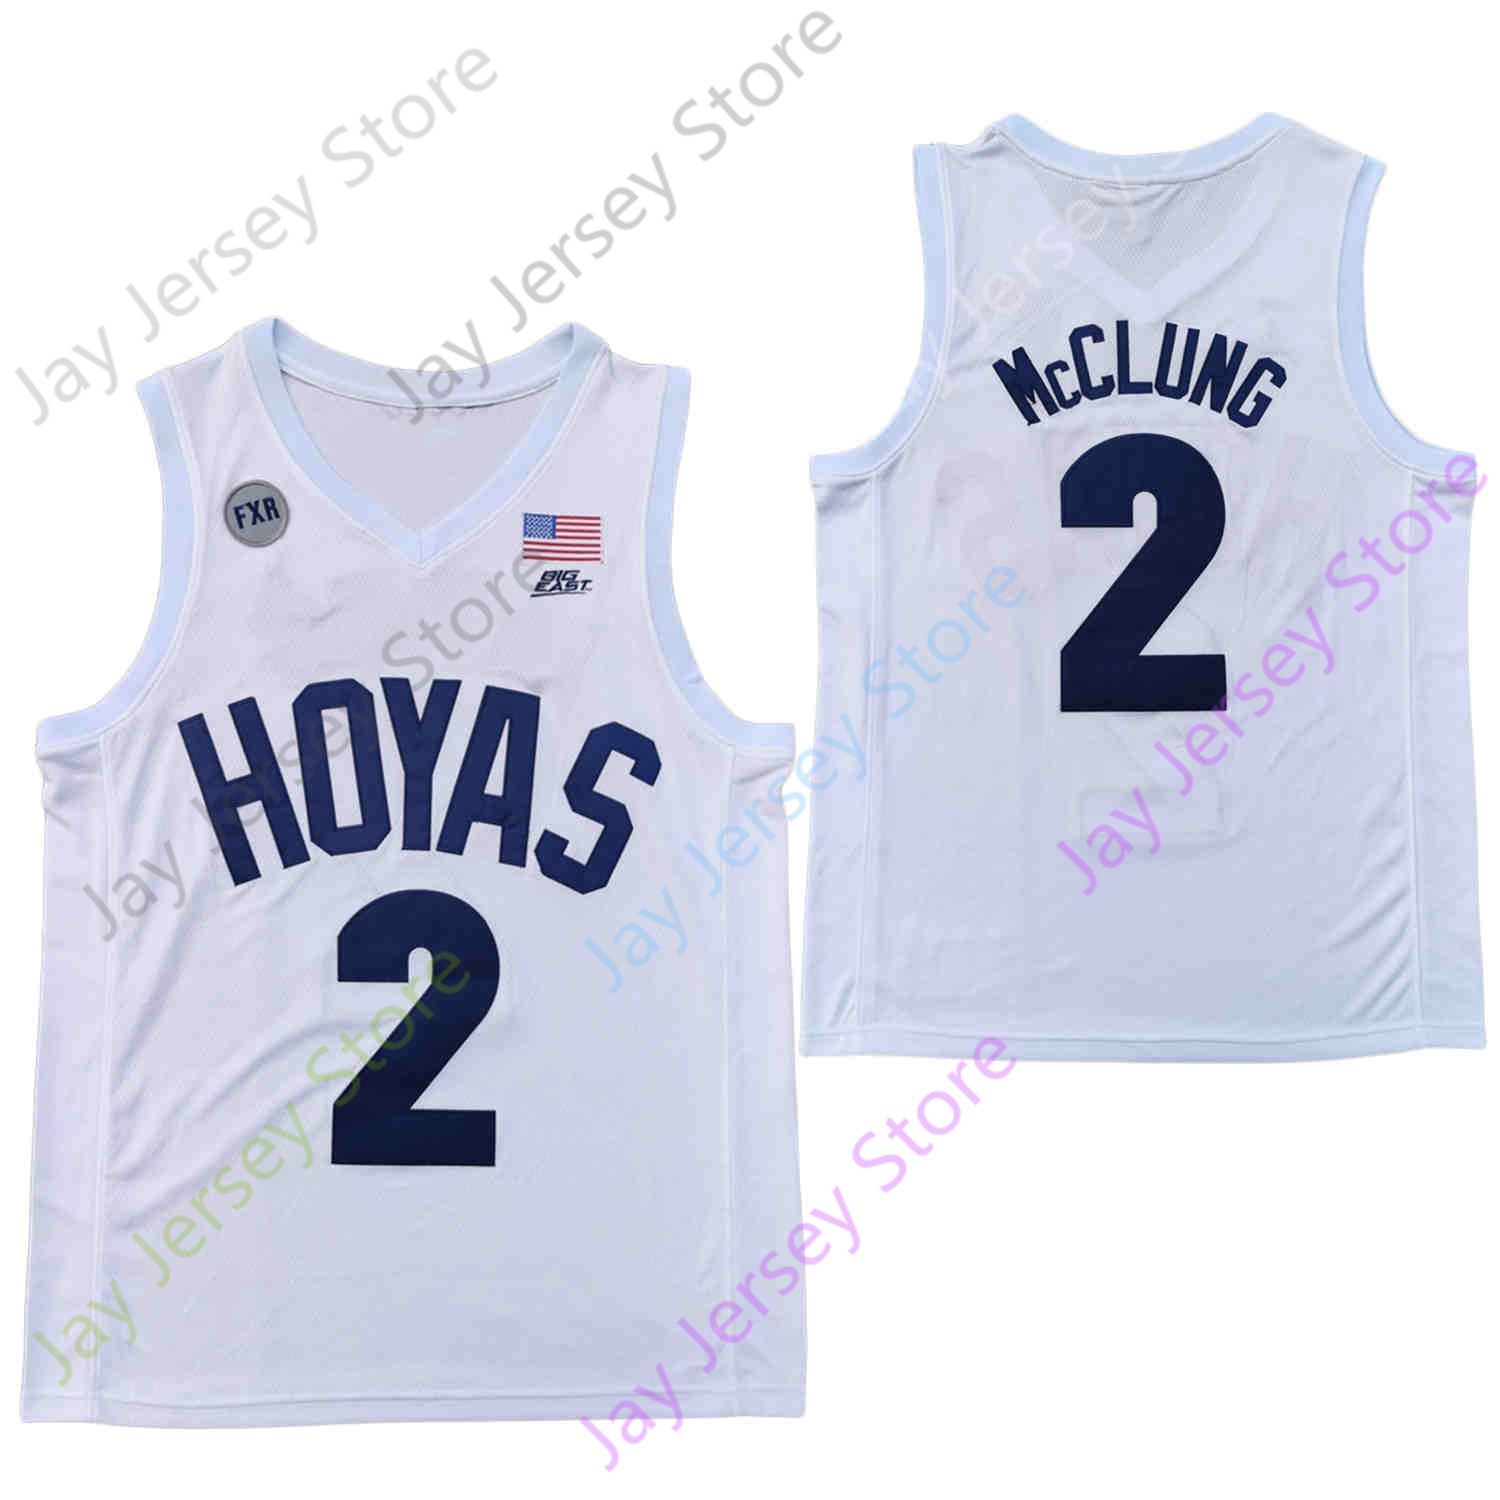 mac mcclung georgetown jersey for sale